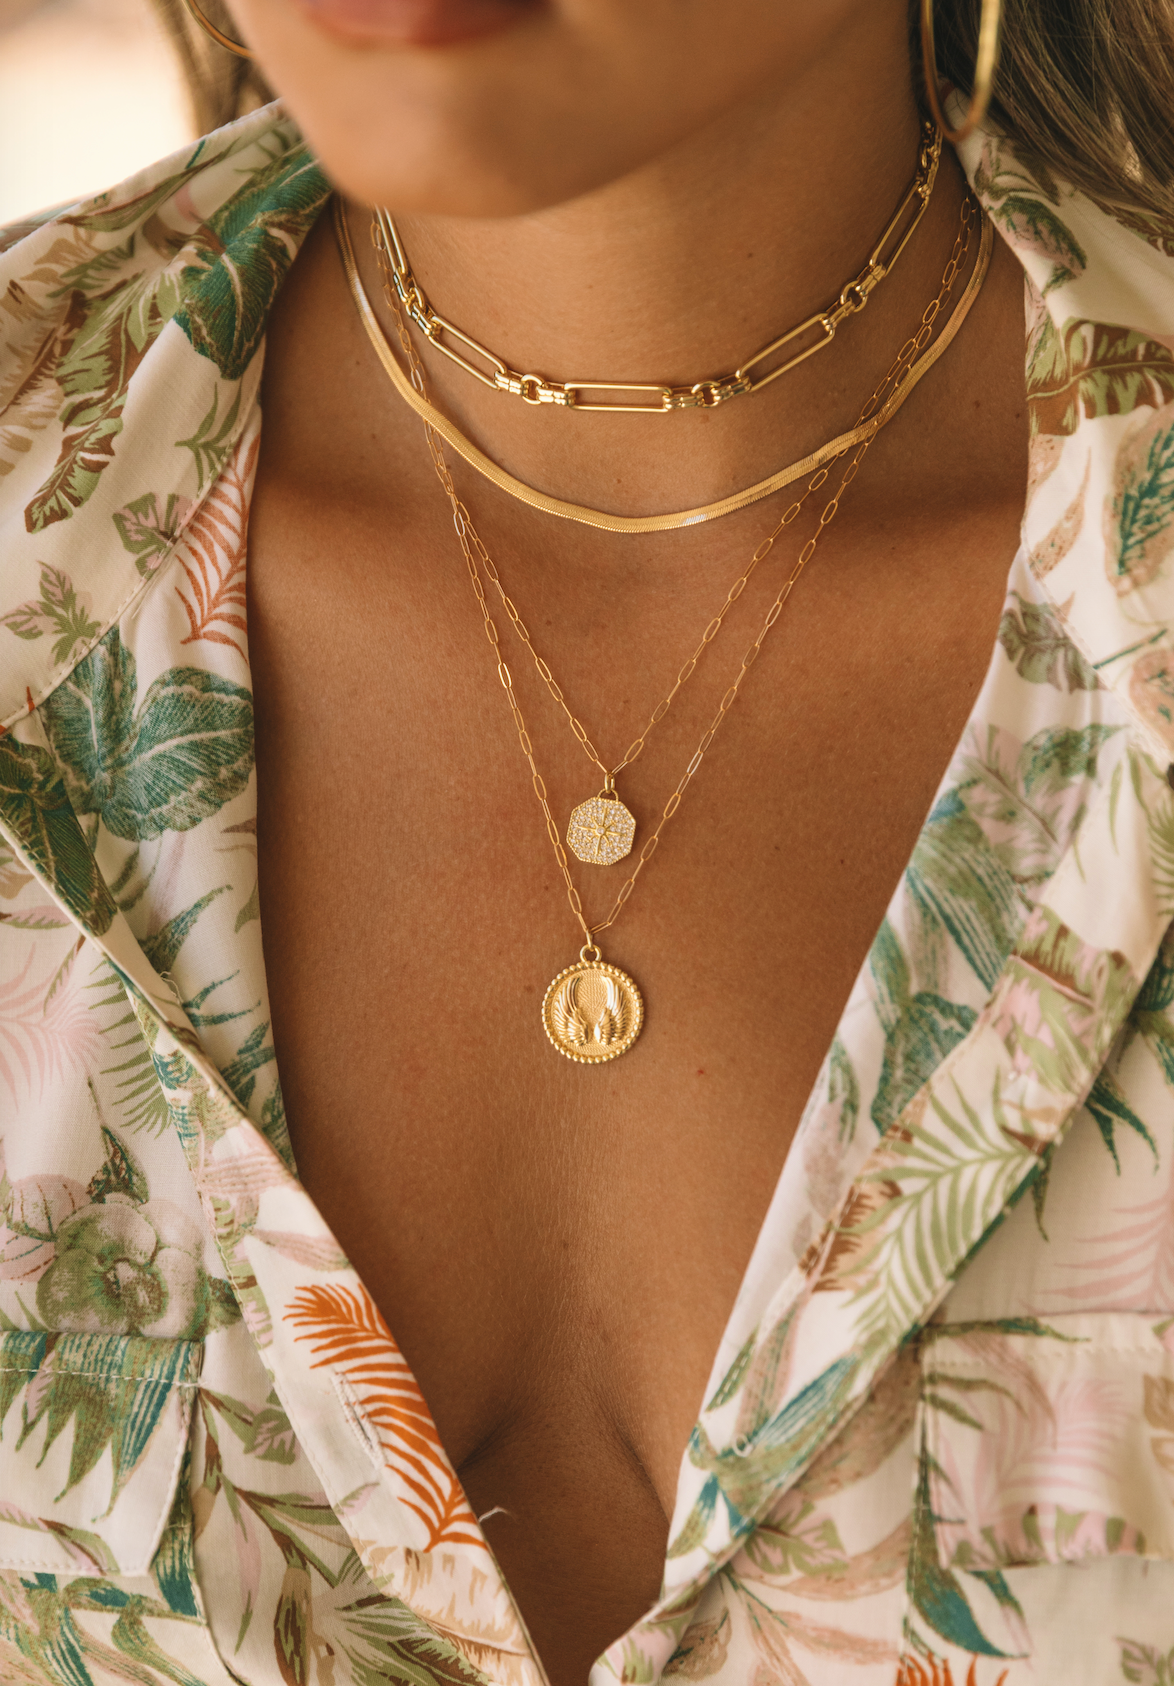 The Double Coin Necklace